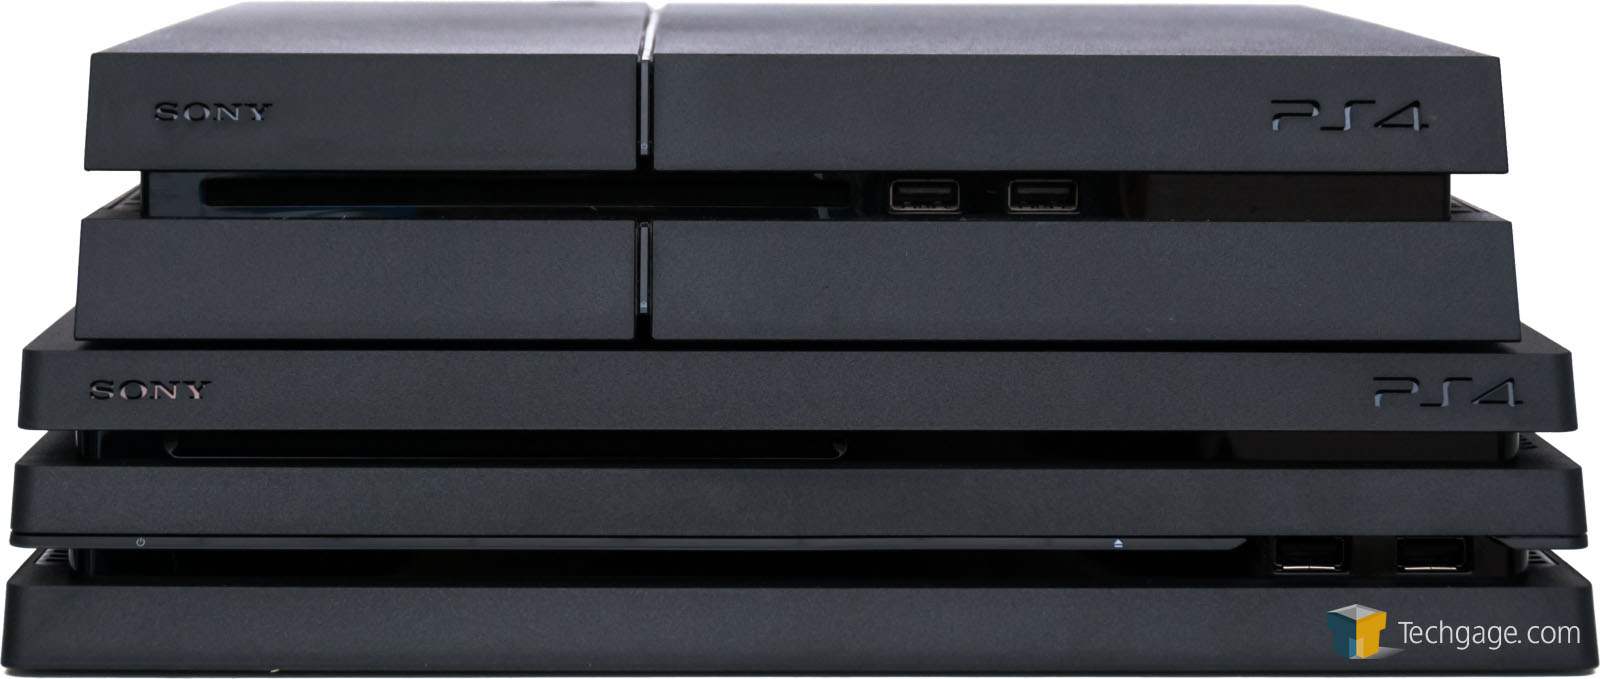 Sony-PS4-Pro-Stacked-Consoles-Front.jpg